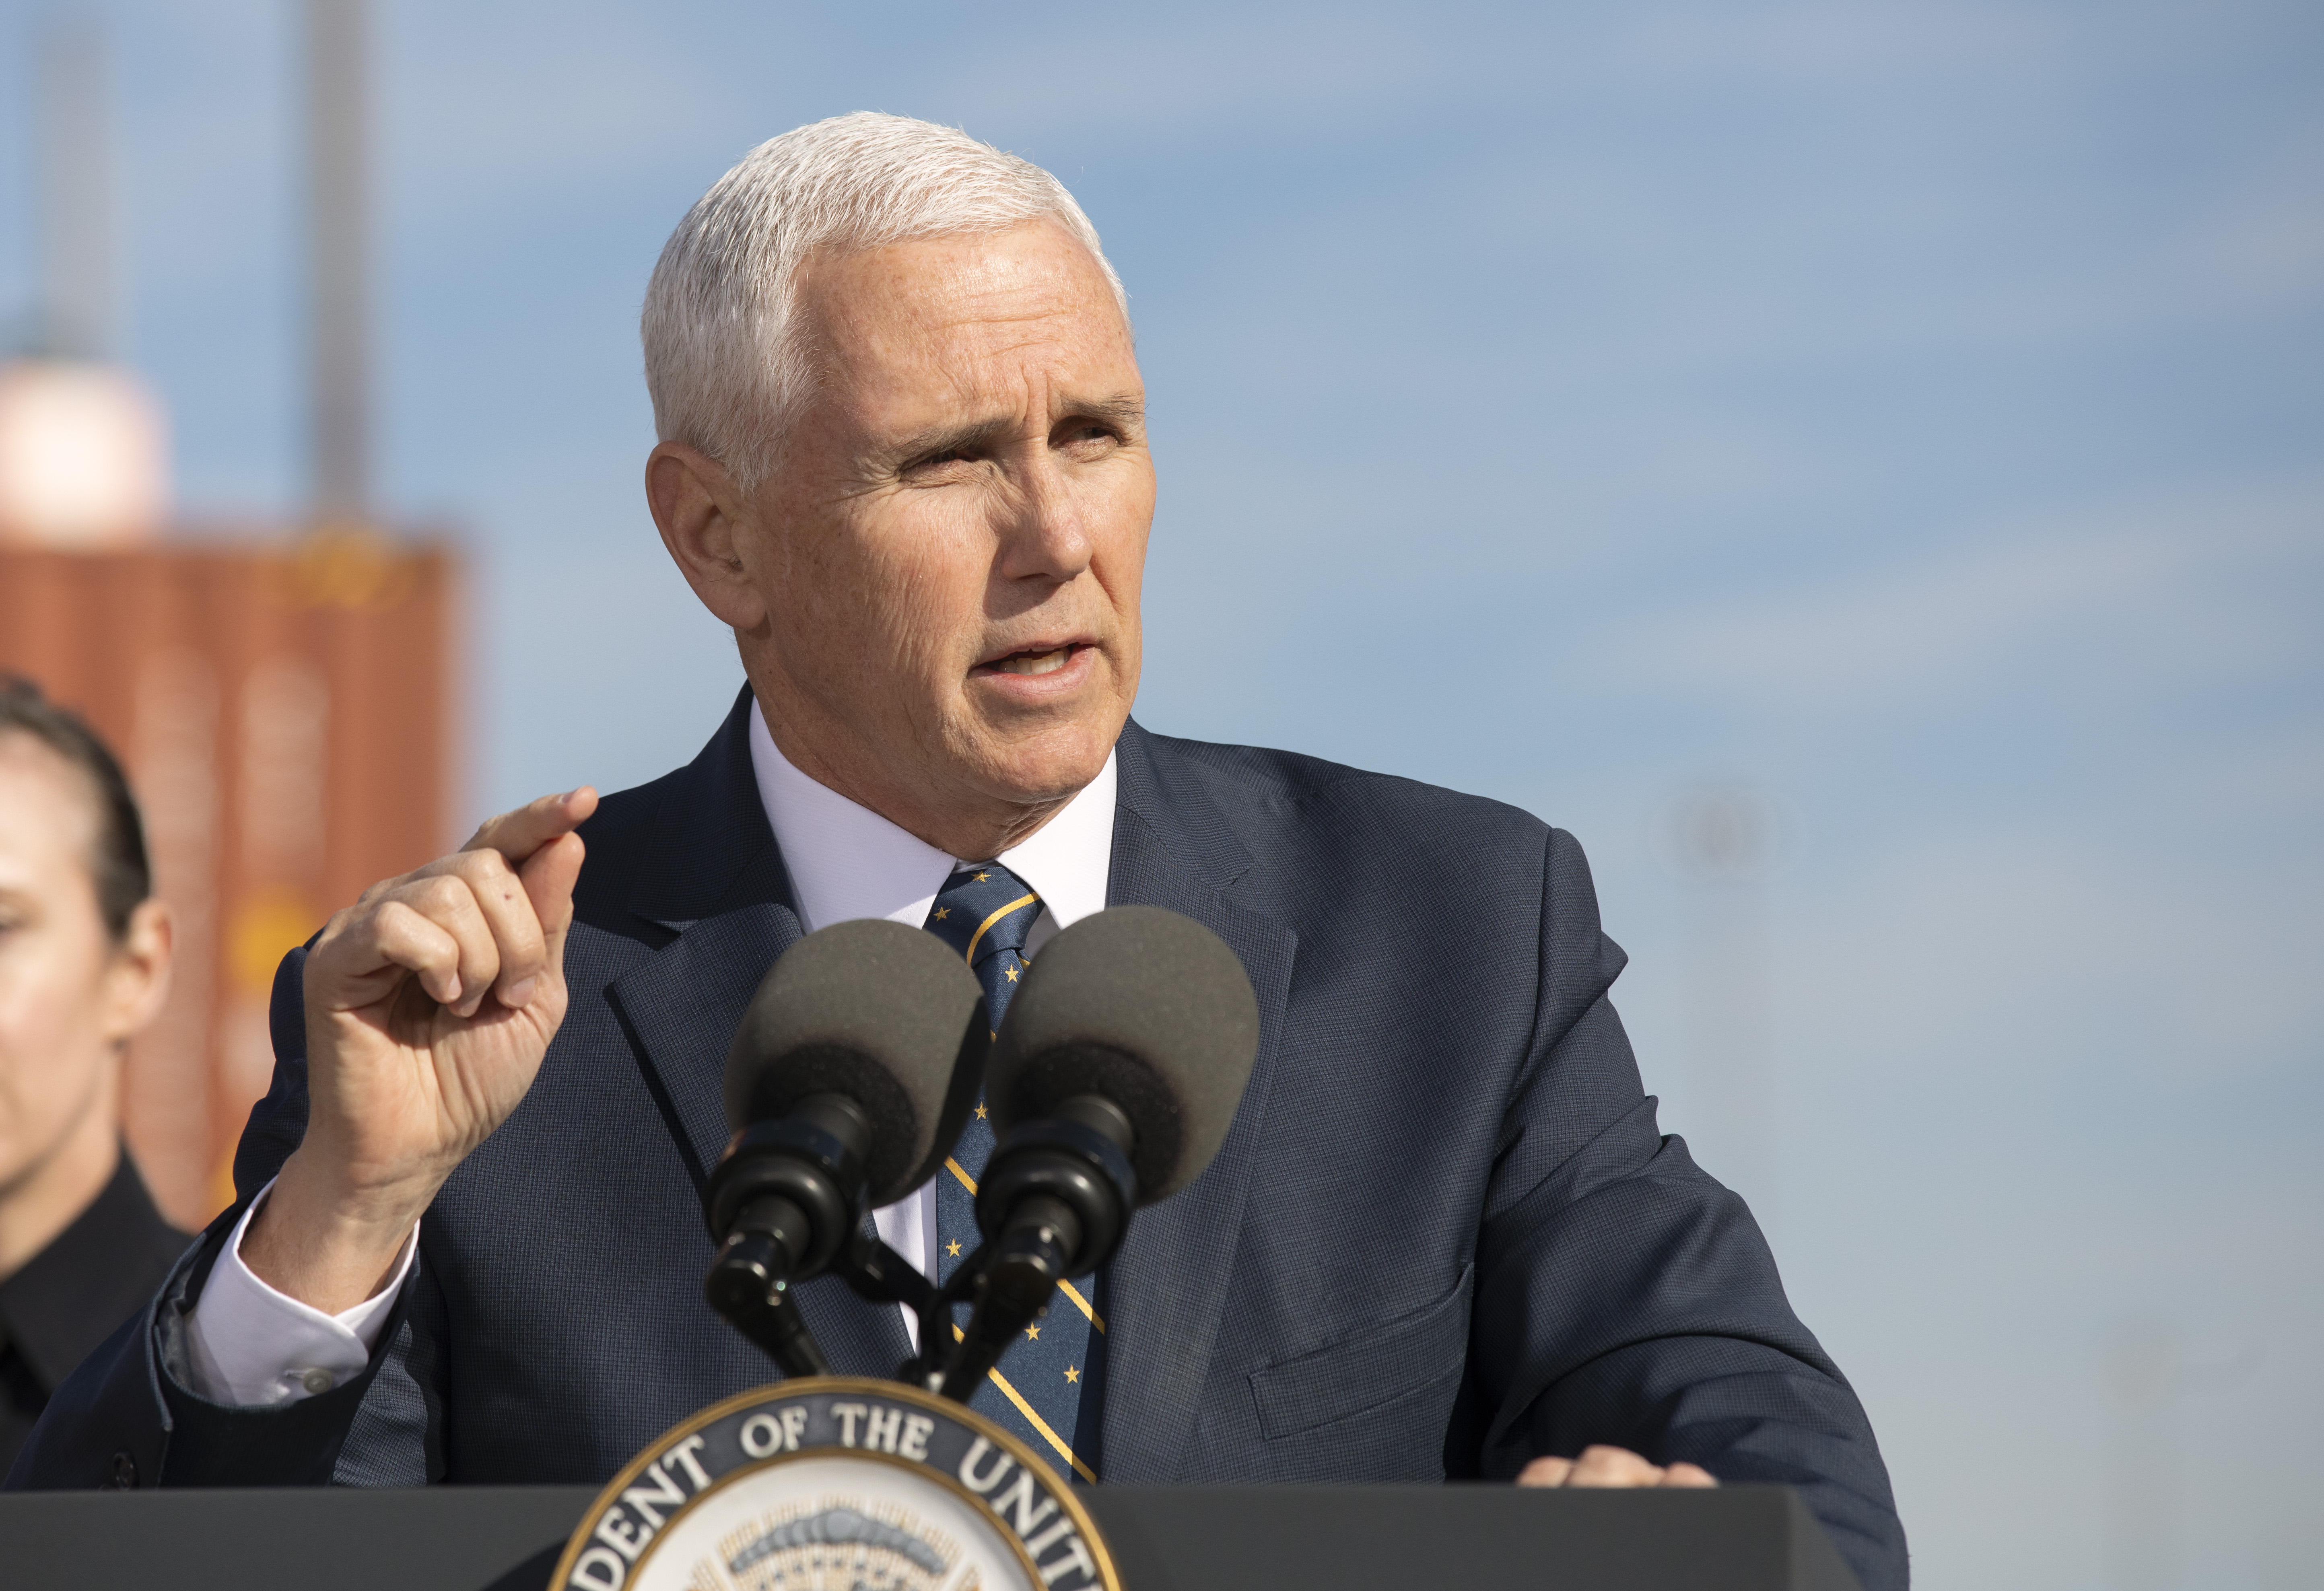 Former US Vice President Mike Pence subpoenaed by special counsel investigating attempts to overturn 2020 election